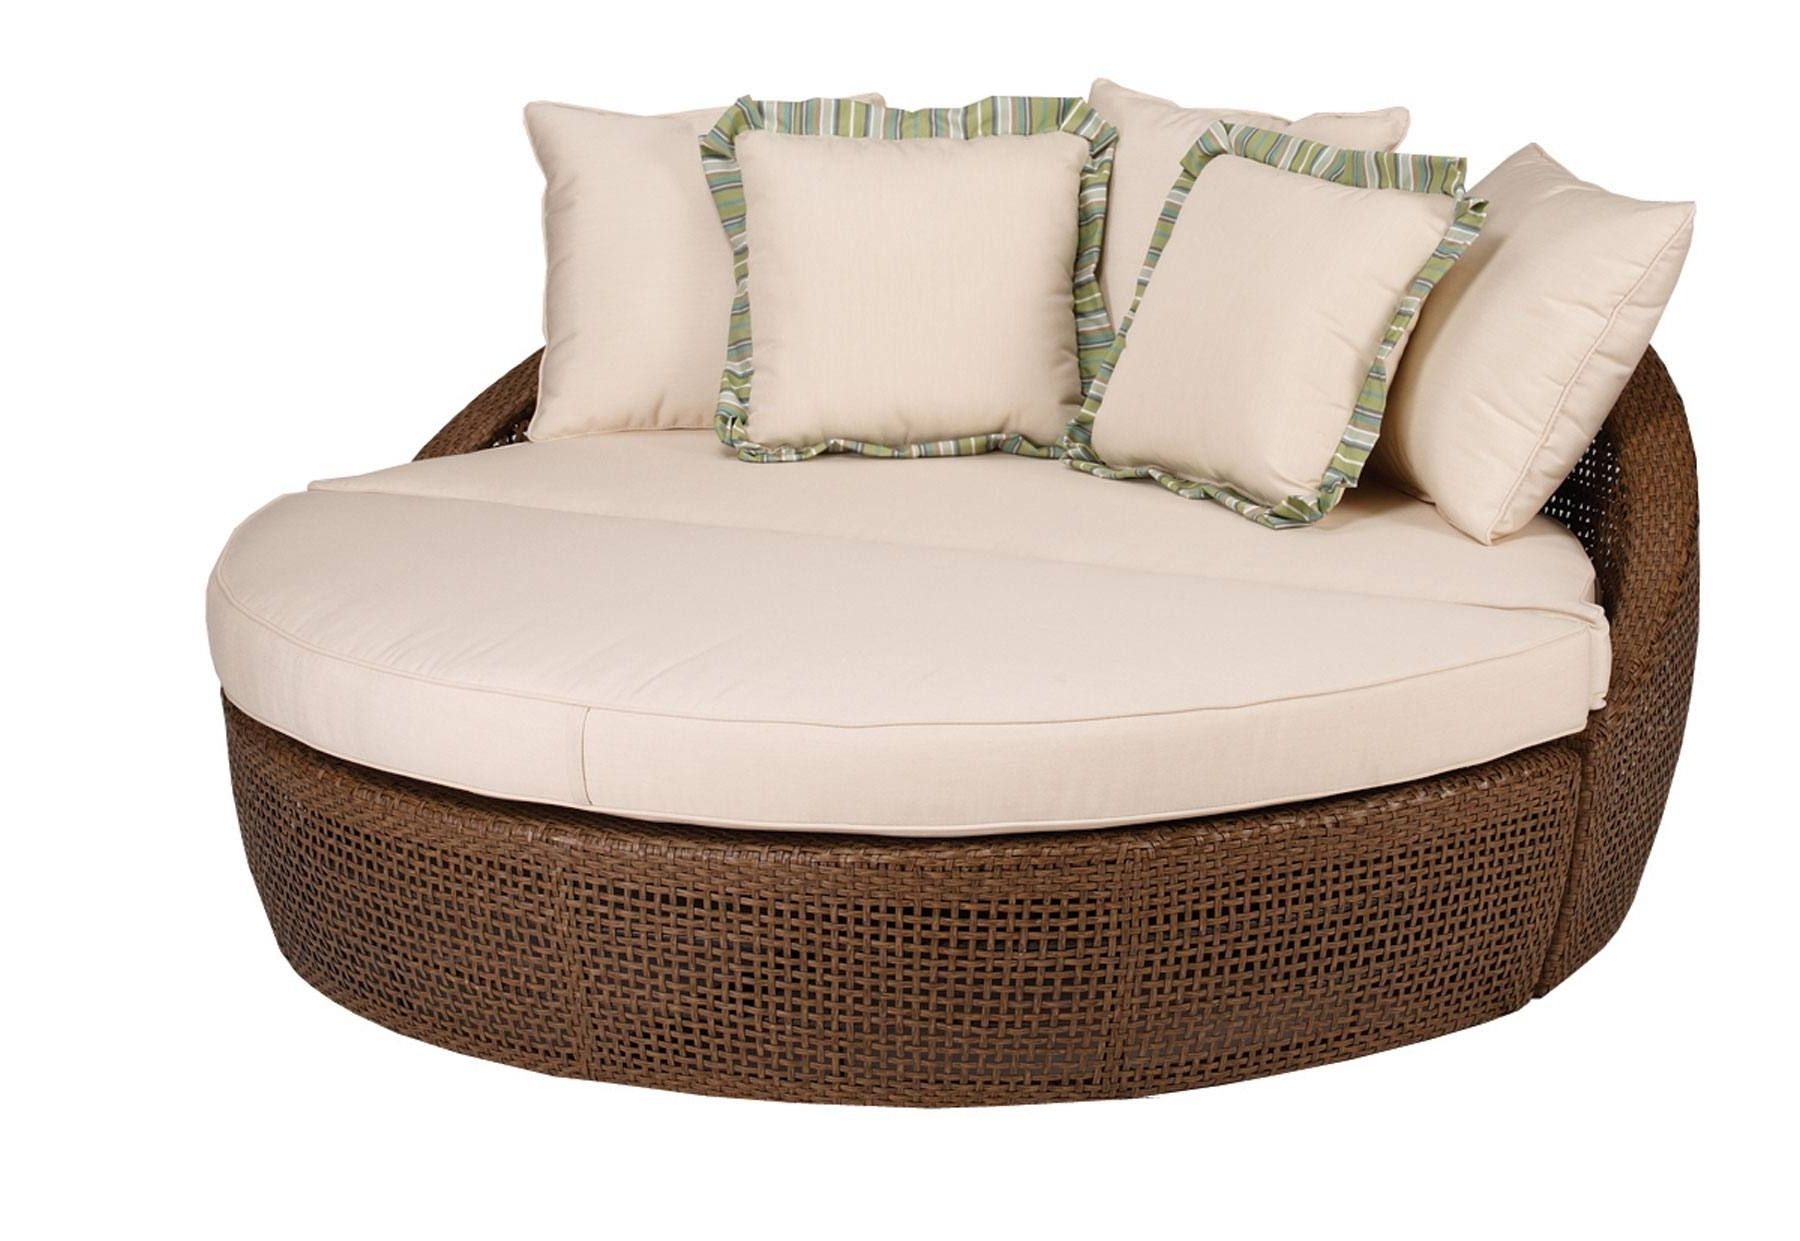 15 Best Round Chaise Lounges